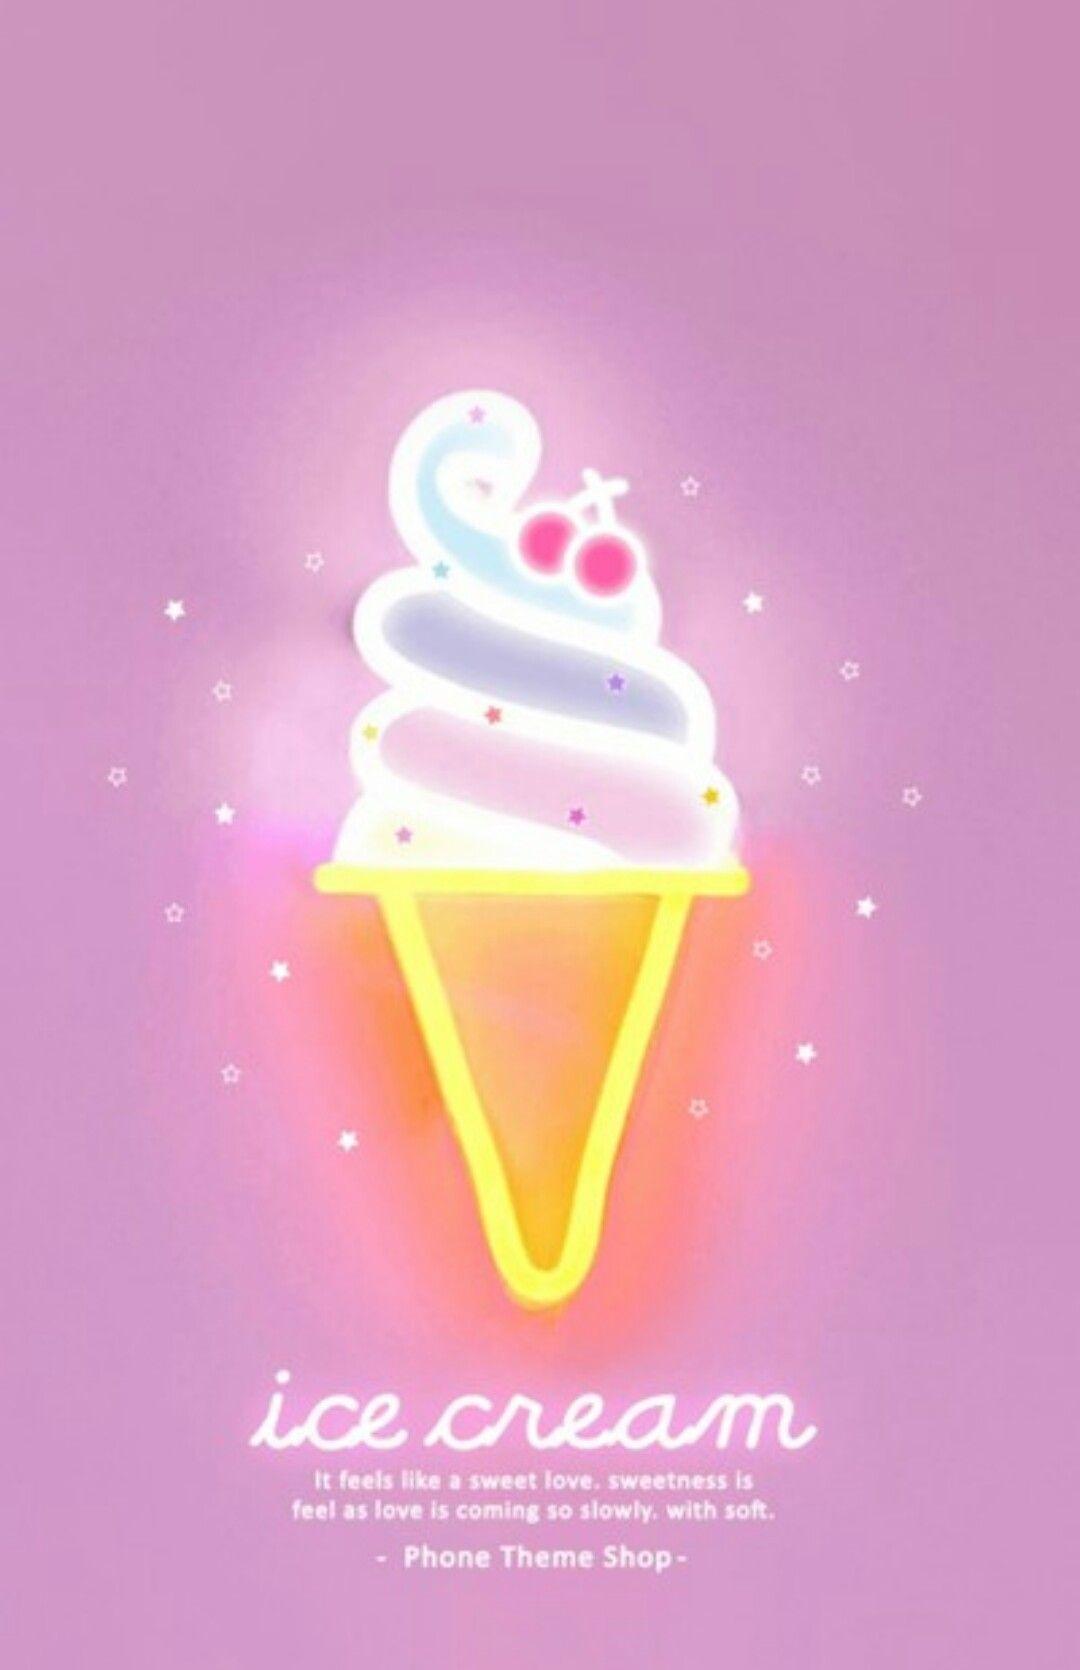 IPhone wallpaper with a pink background and a neon sign of an ice cream cone - Ice cream